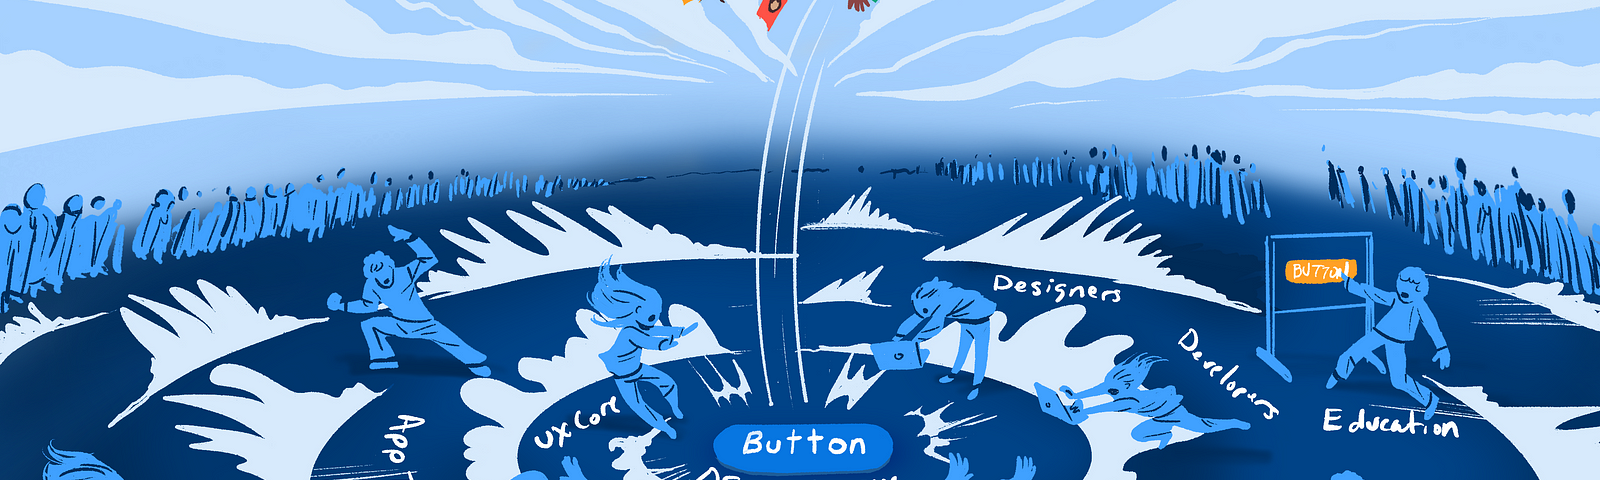 An illustration representing the chaotic impact of changing a button caused by a lack of communication